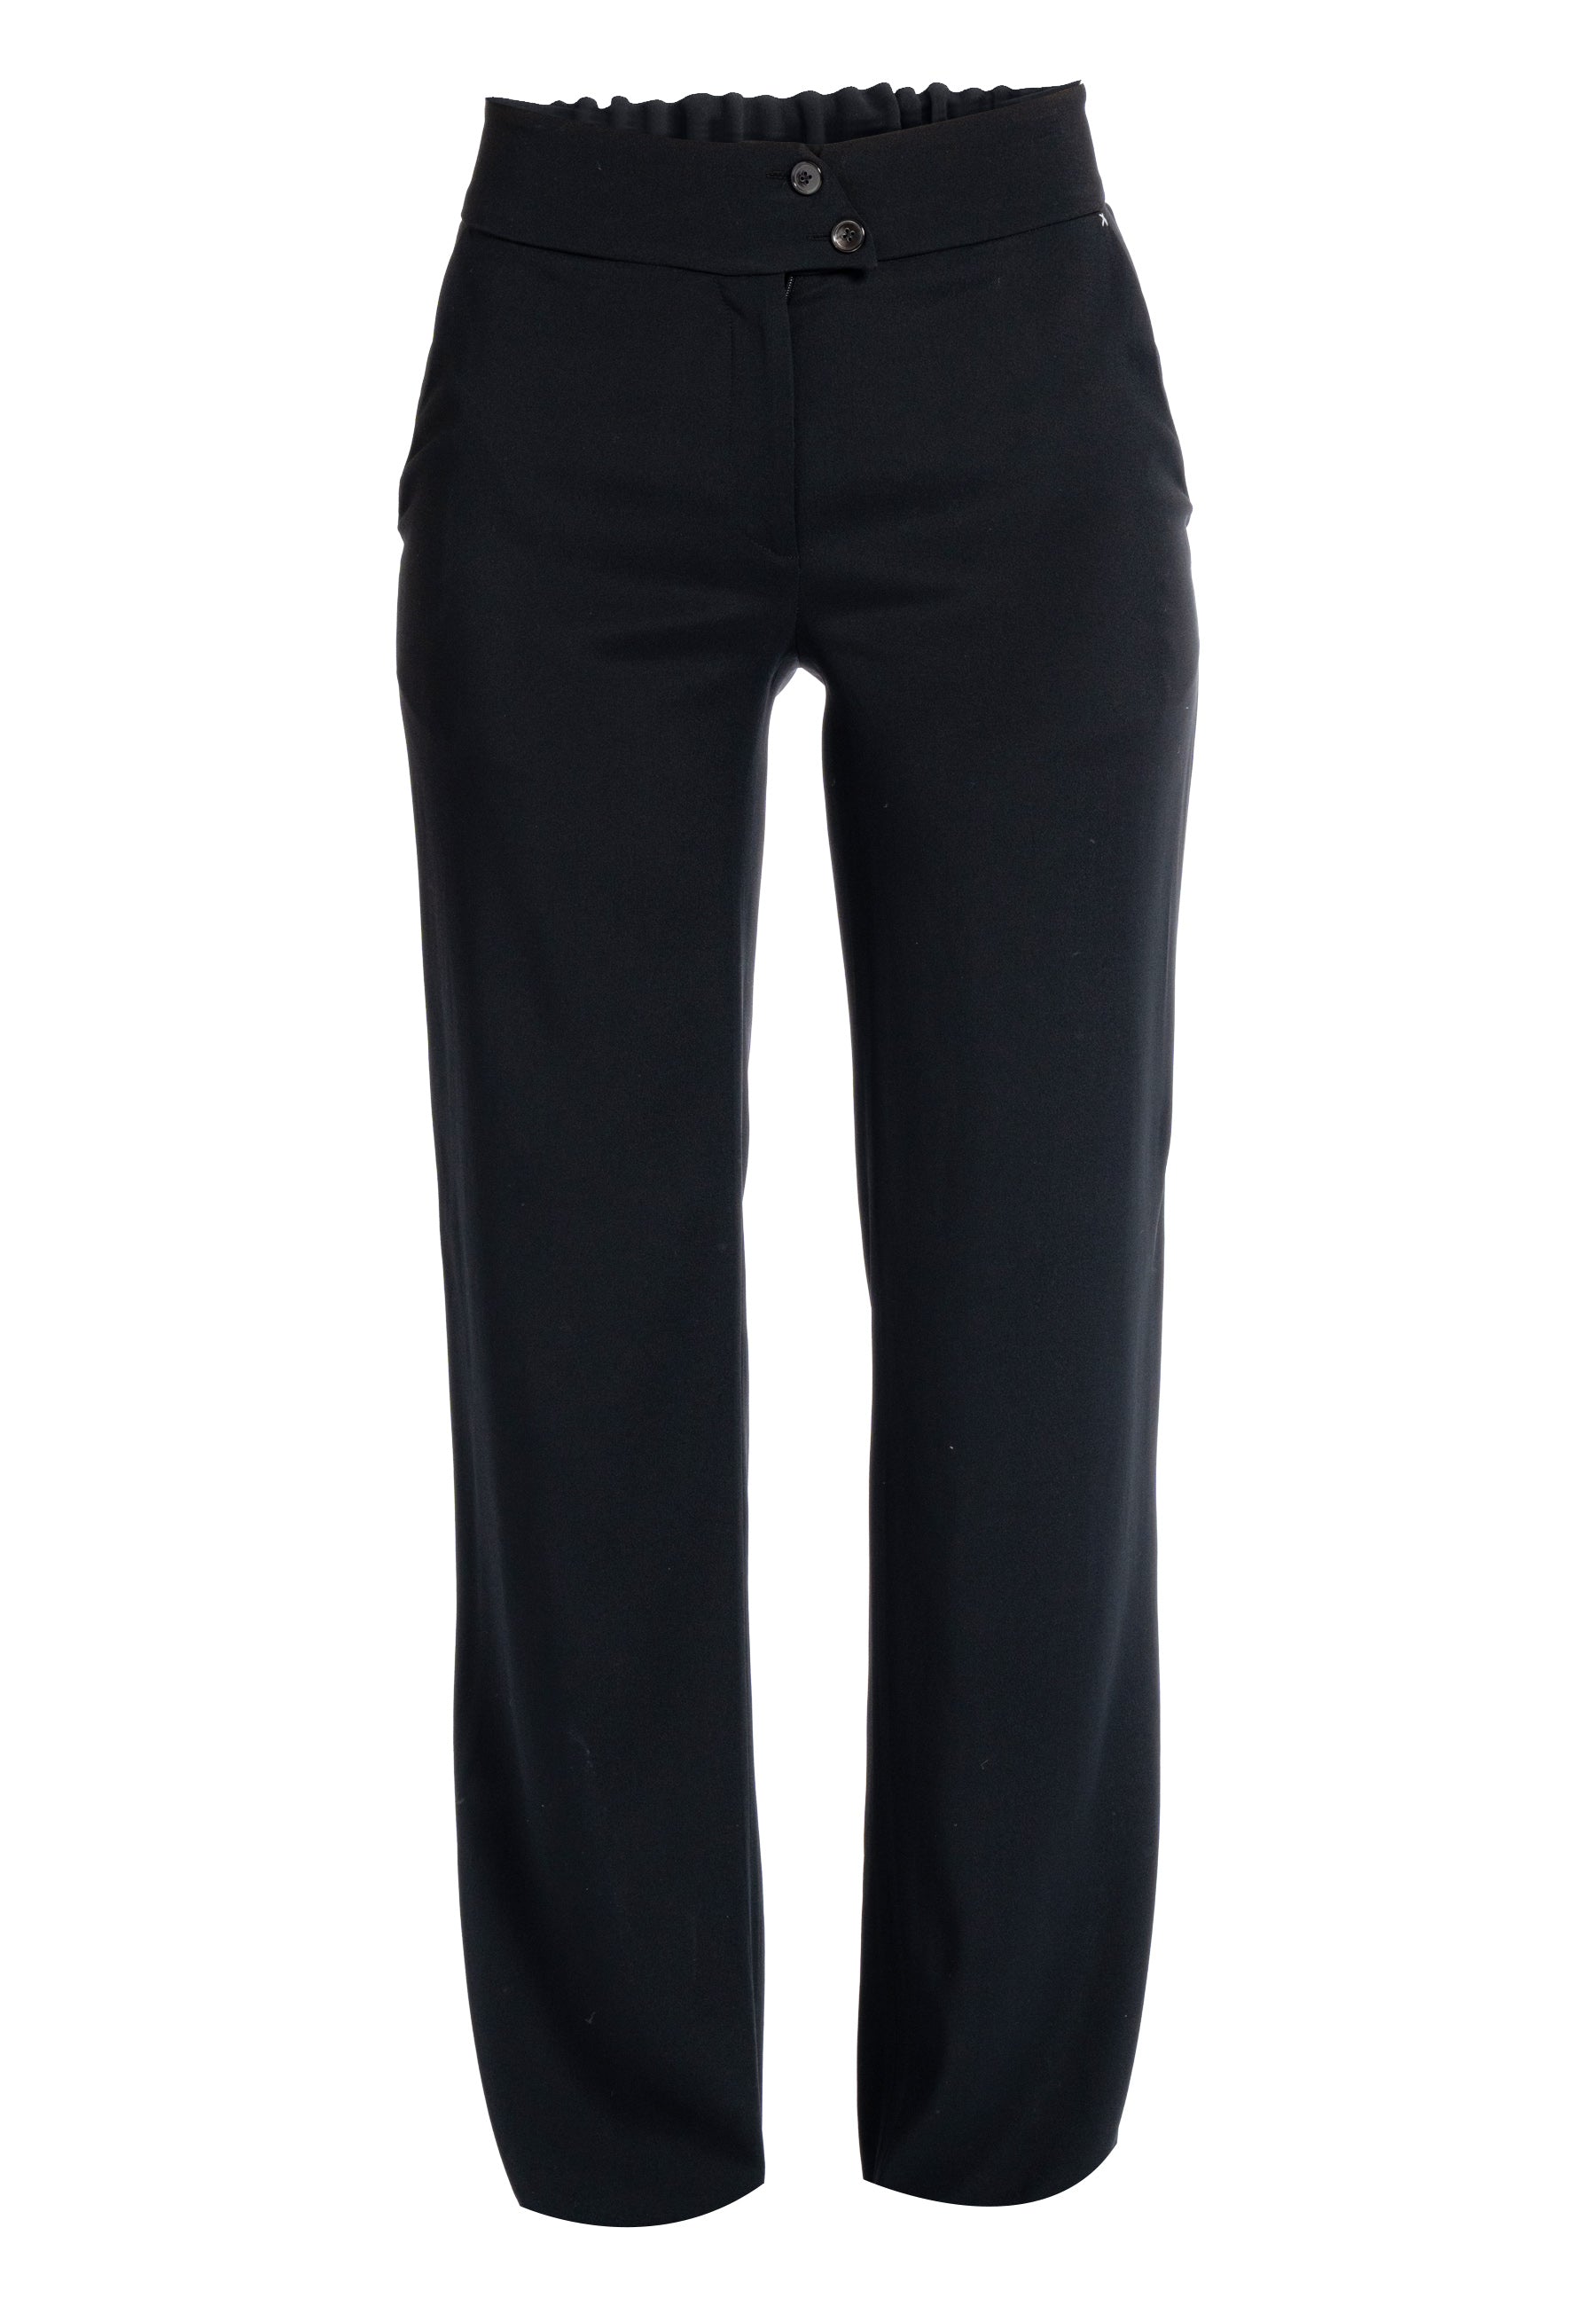 high waisted pants black wide legged suit pants wide leg suits pants  wide leg pants  black wide legged suit pants women black pants black trousers for women black trousers black high waisted trousers womens black pants with pockets  black office pants for ladies designer pants for women